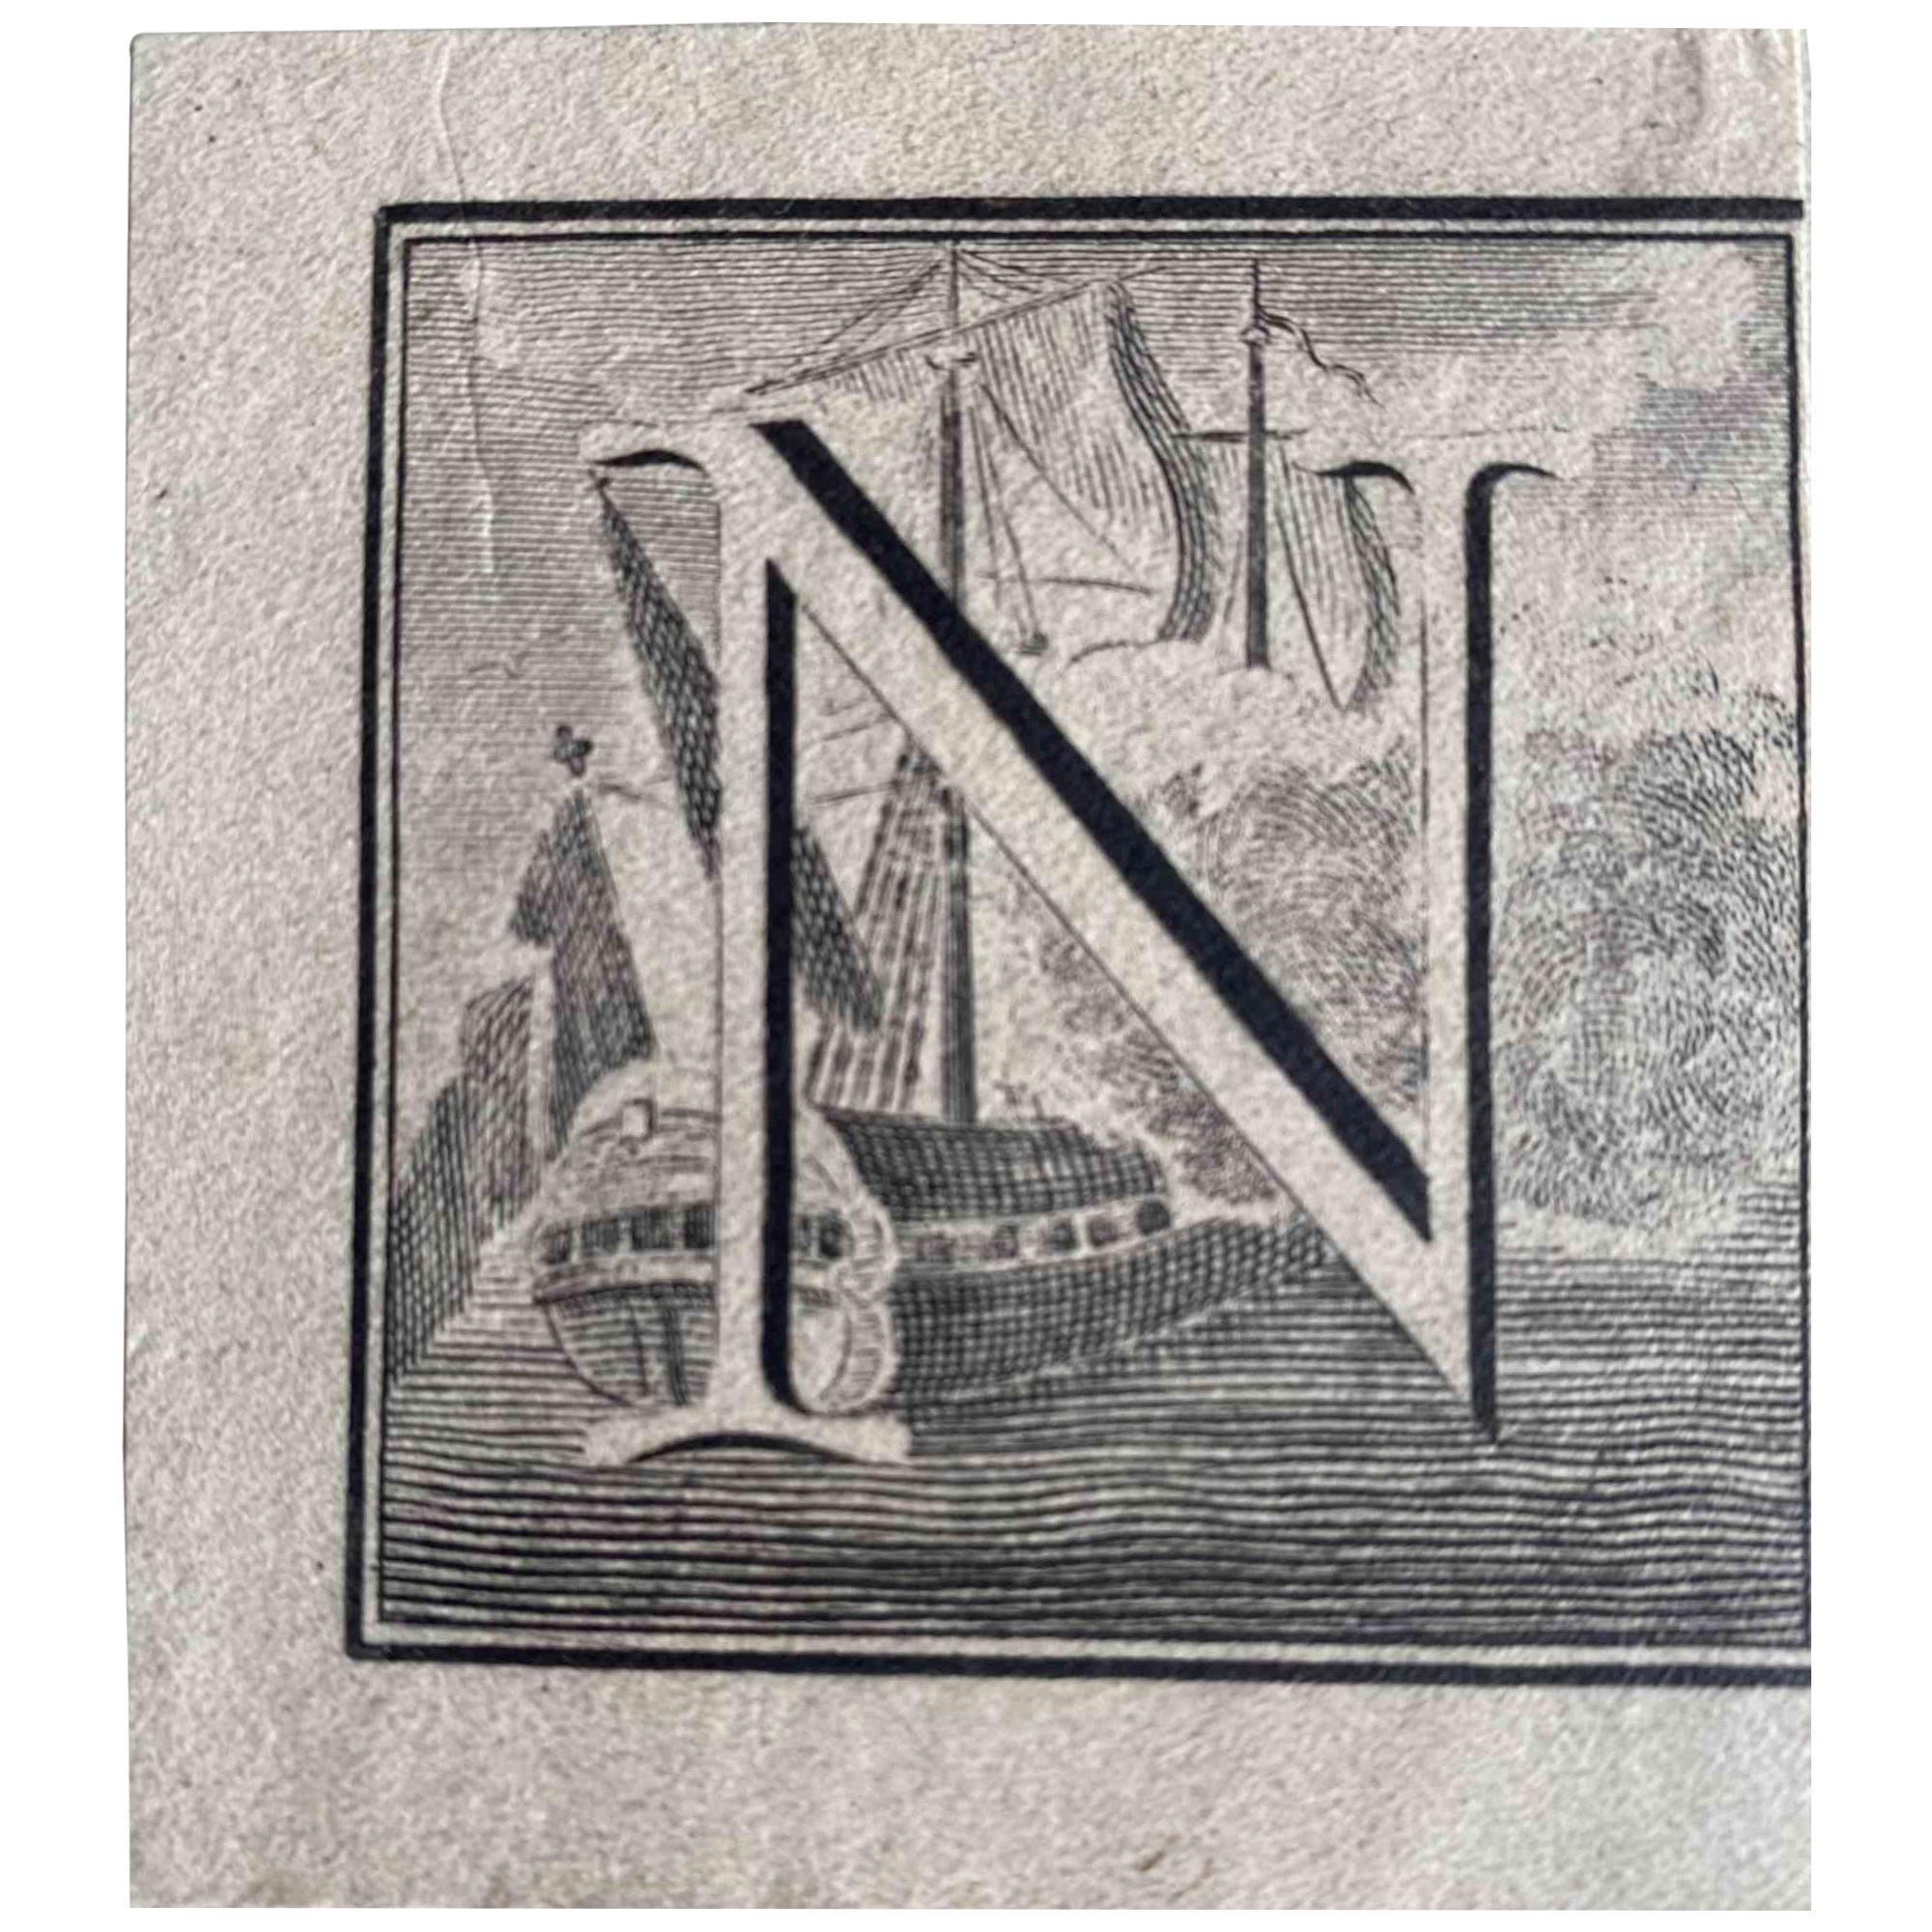 Carlo Nolli Figurative Print - Antiquities of Herculaneum -  Letter of the Alphabet  N - Etching - 18th Century